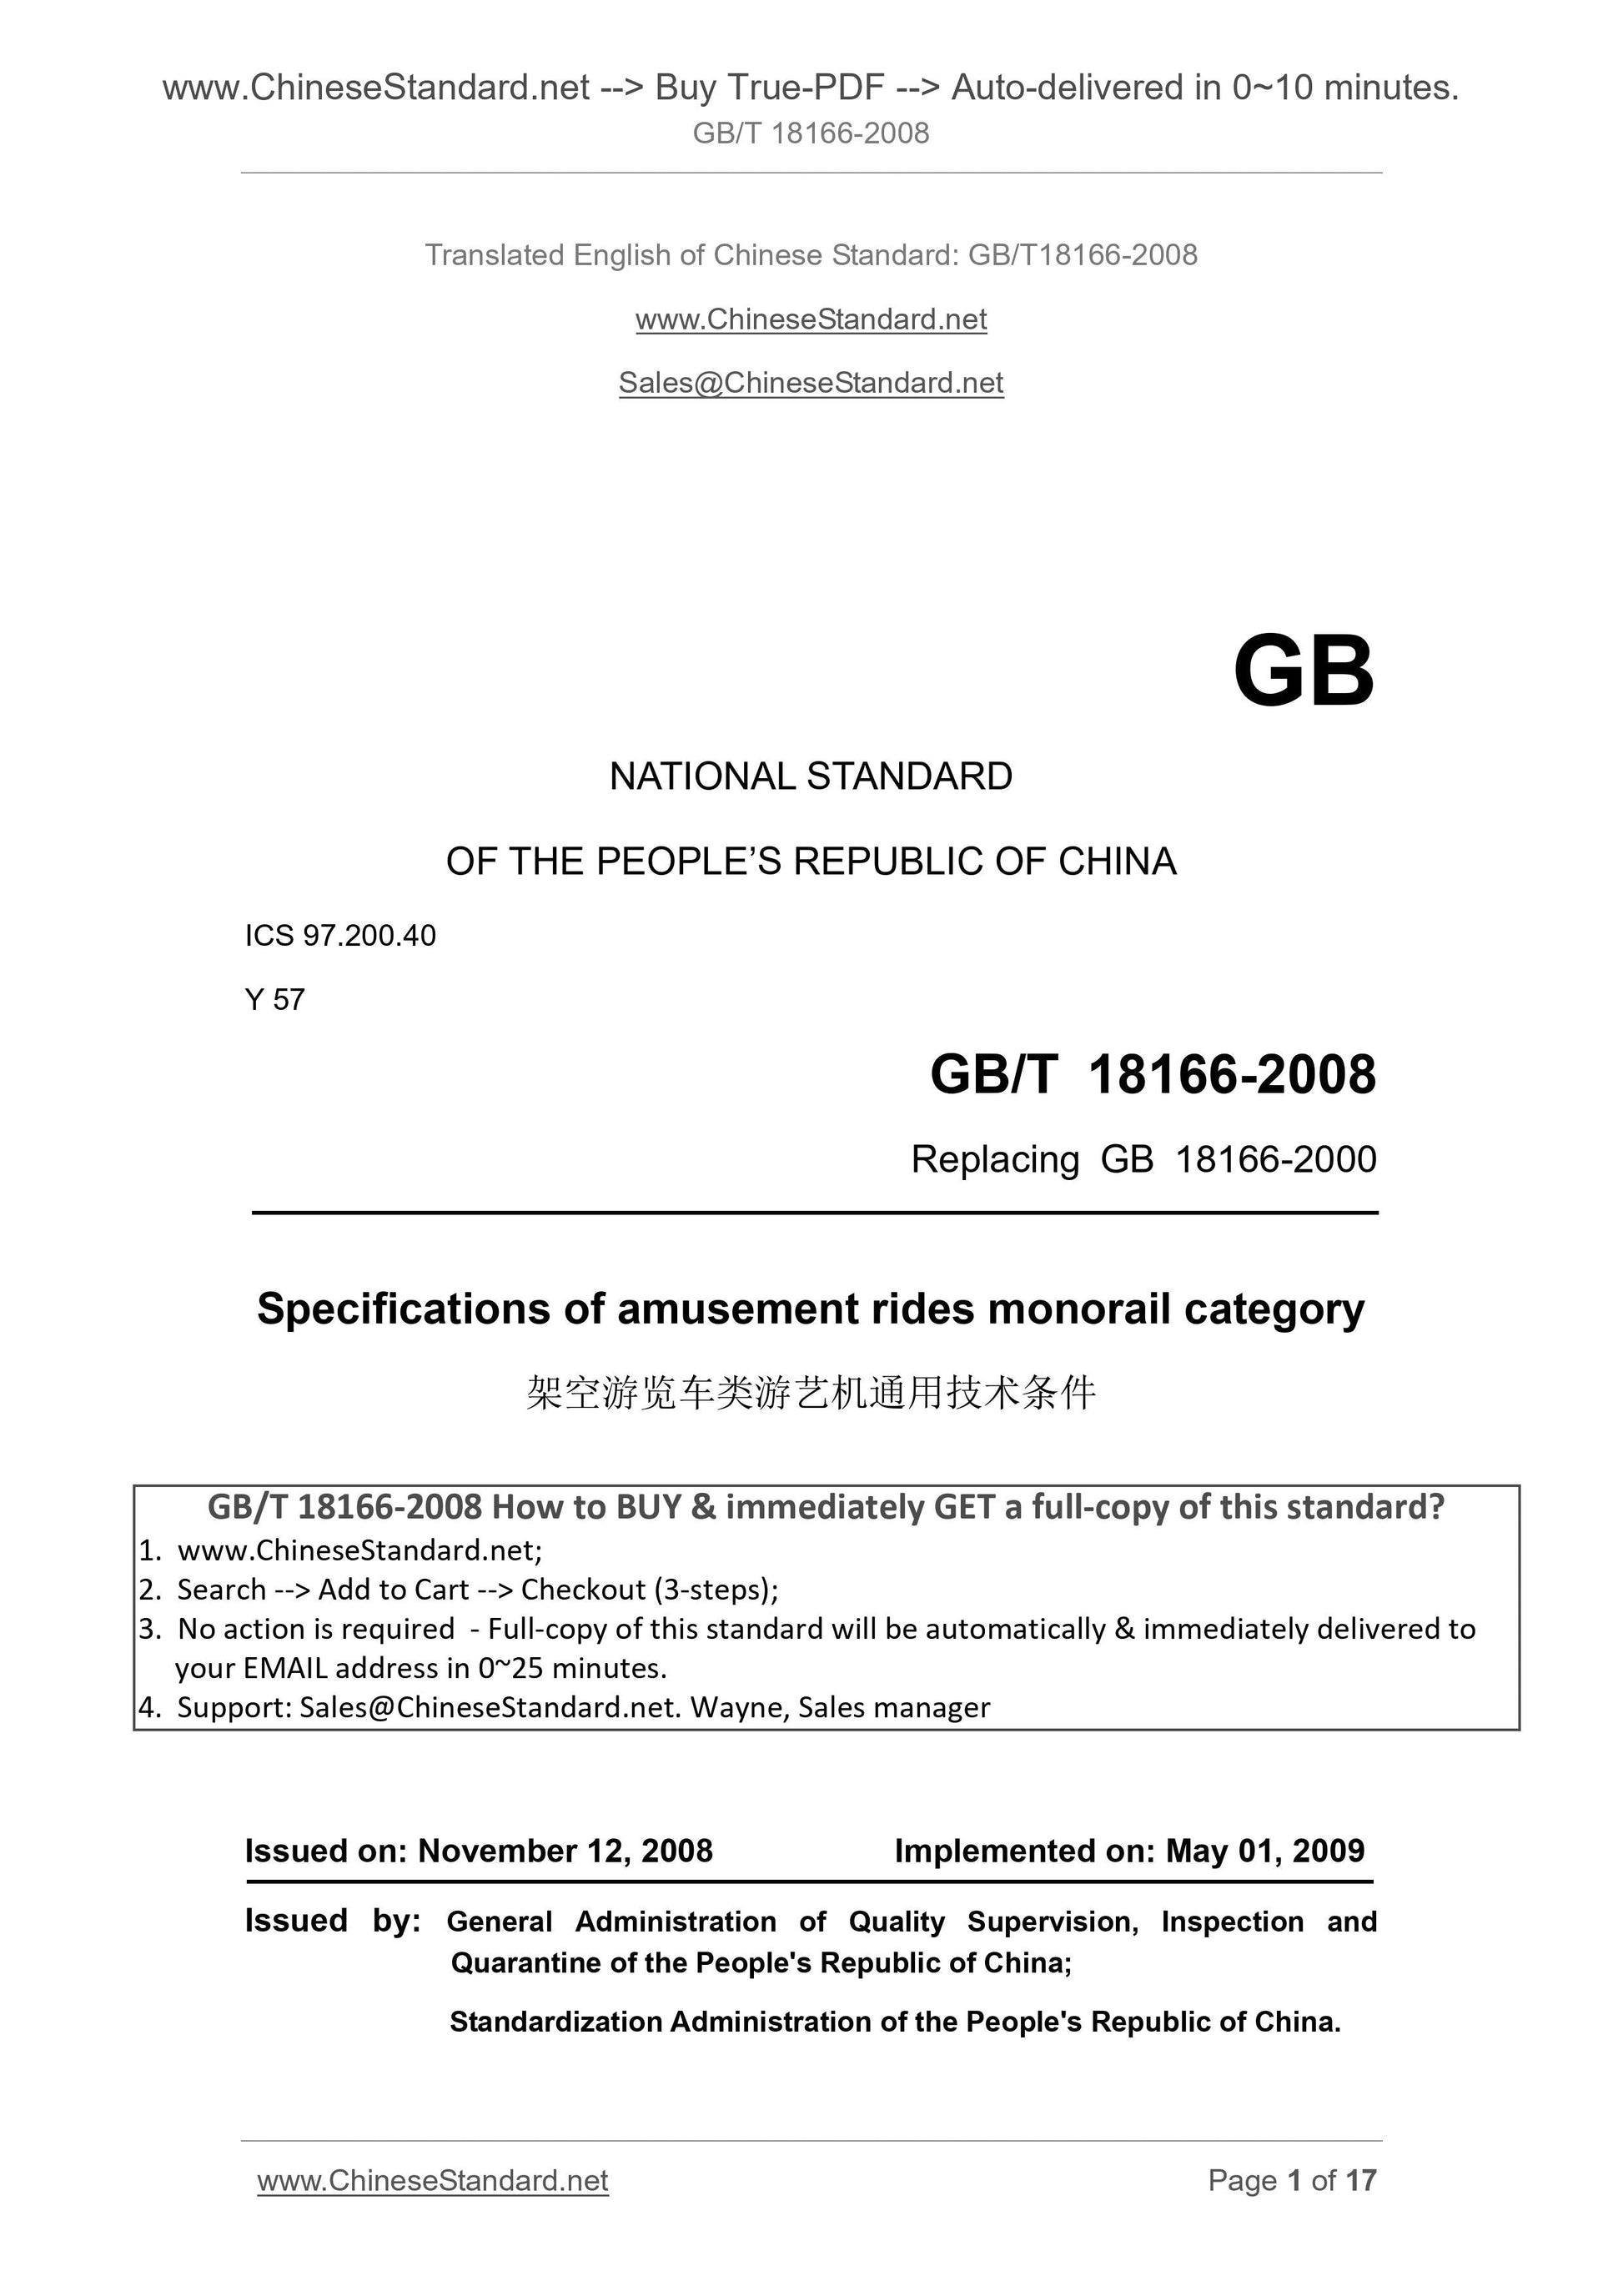 GB/T 18166-2008 Page 1